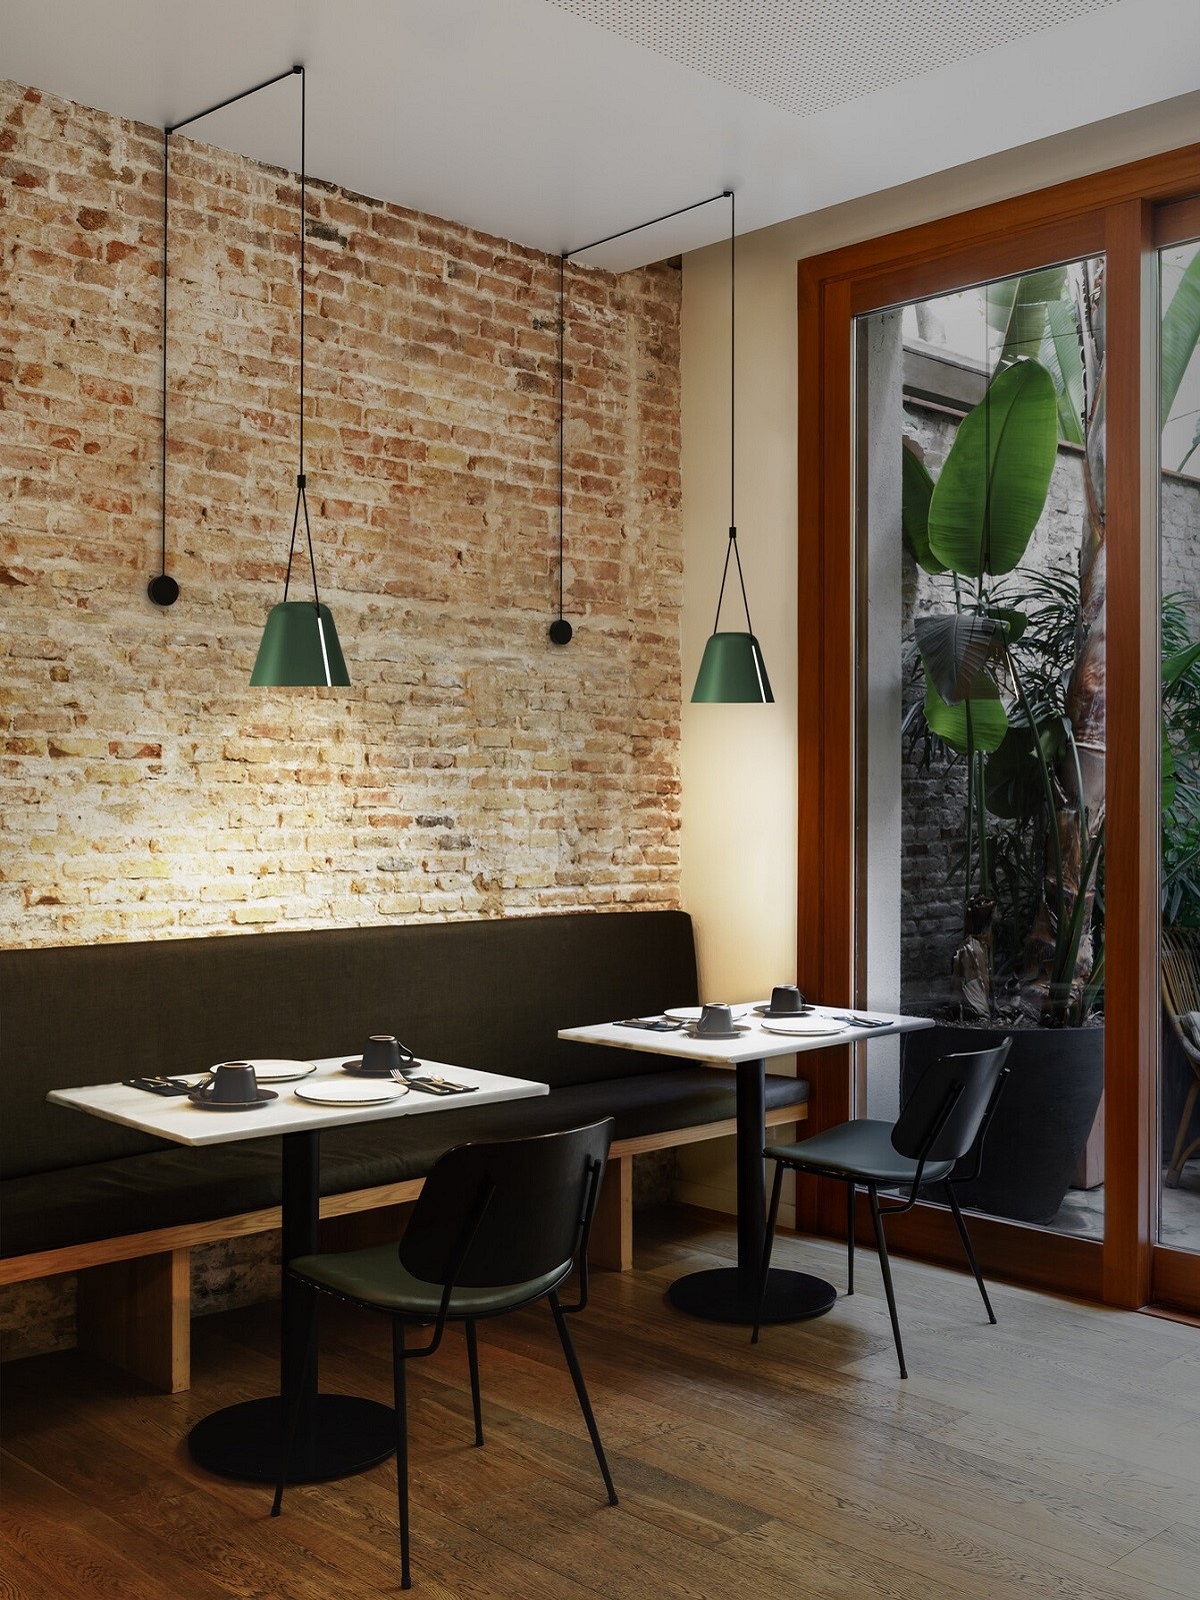 restaurant tables against exposed brick wall with Attic lights above